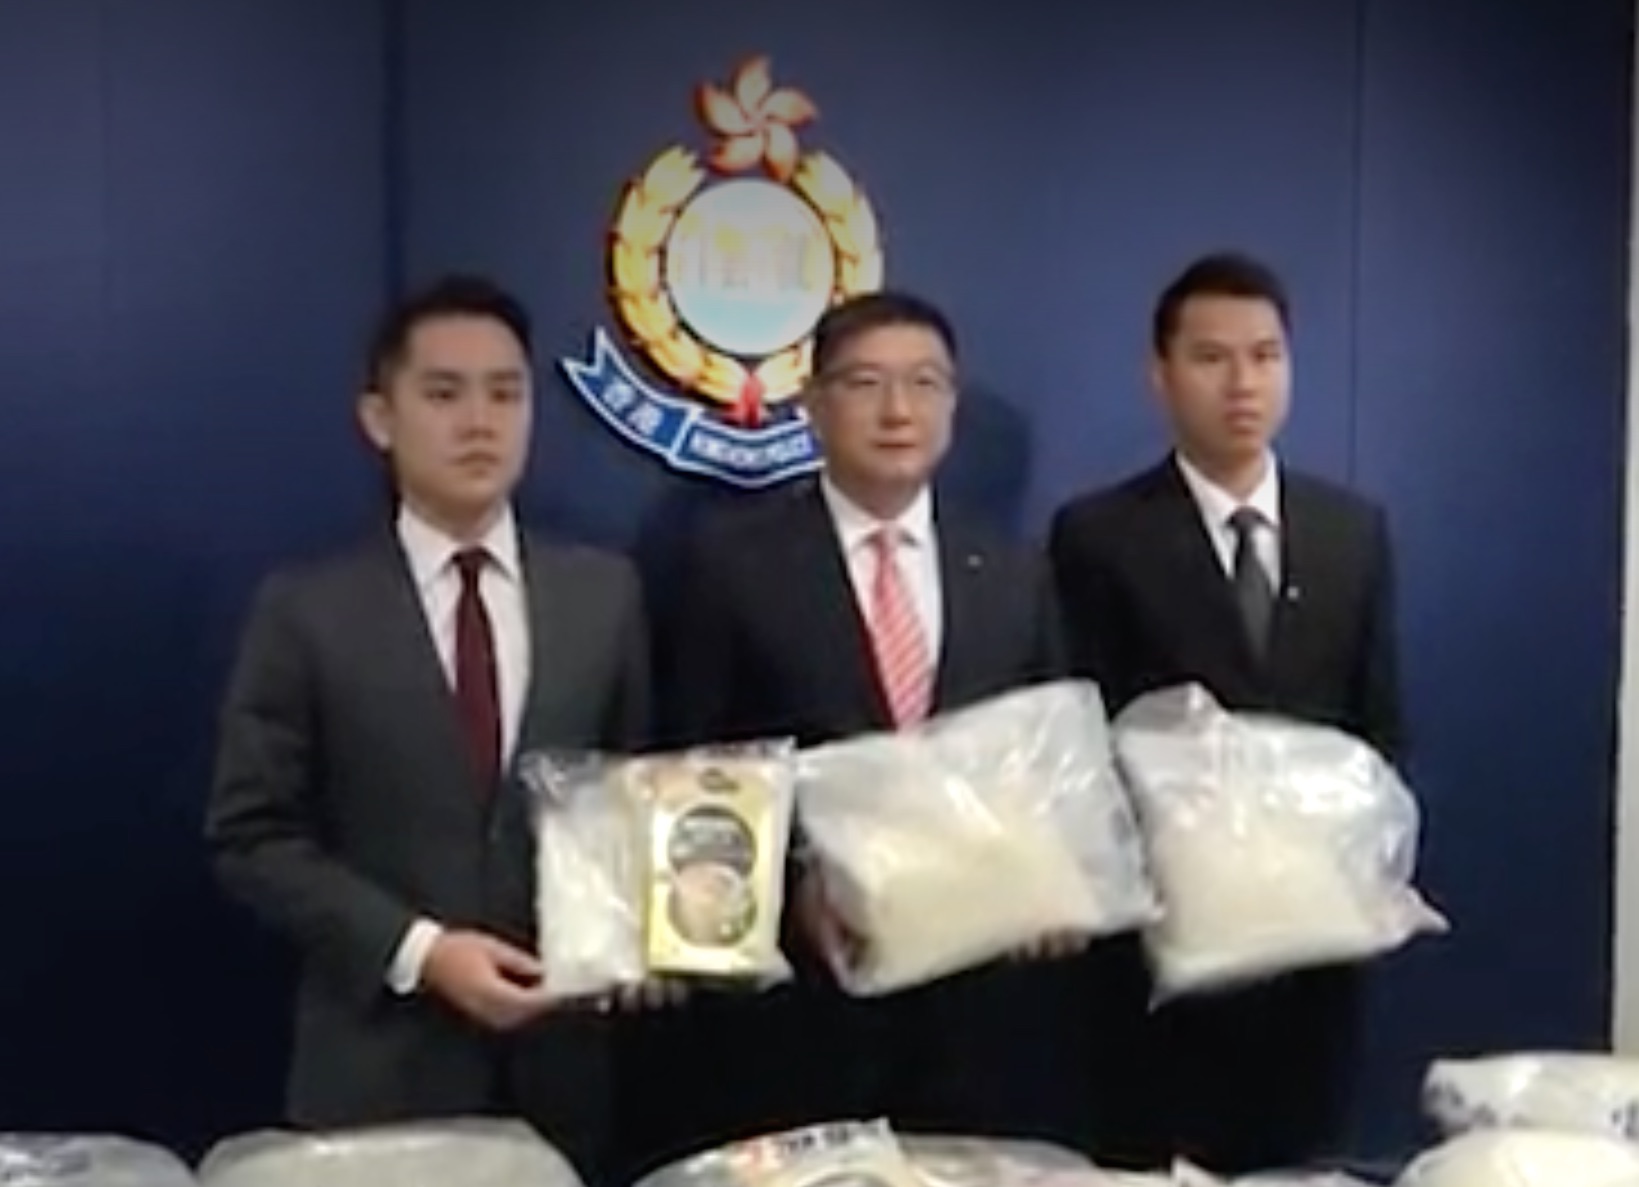 Anti-drug police celebrating their massive bust the best way they know how: getting photographed holding big bags of drugs. Screengrab via Apple Daily video.